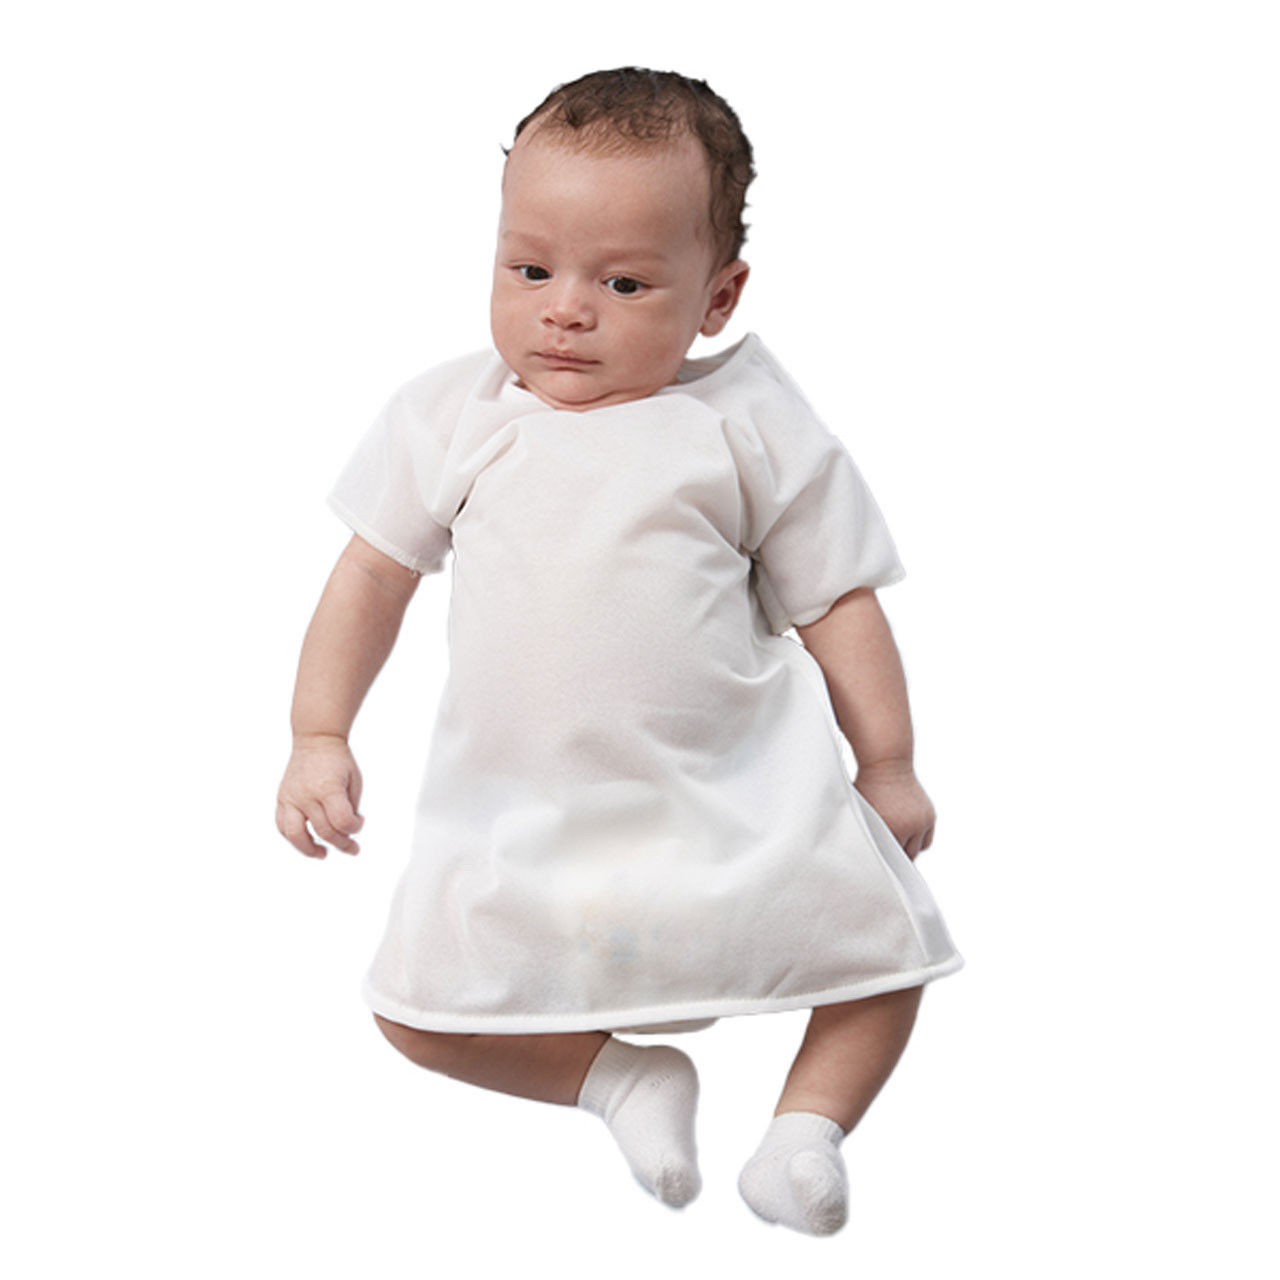 How many baby hospital gowns are packed in a single case of Pediatric Hospital Gowns, White - In Bulk?